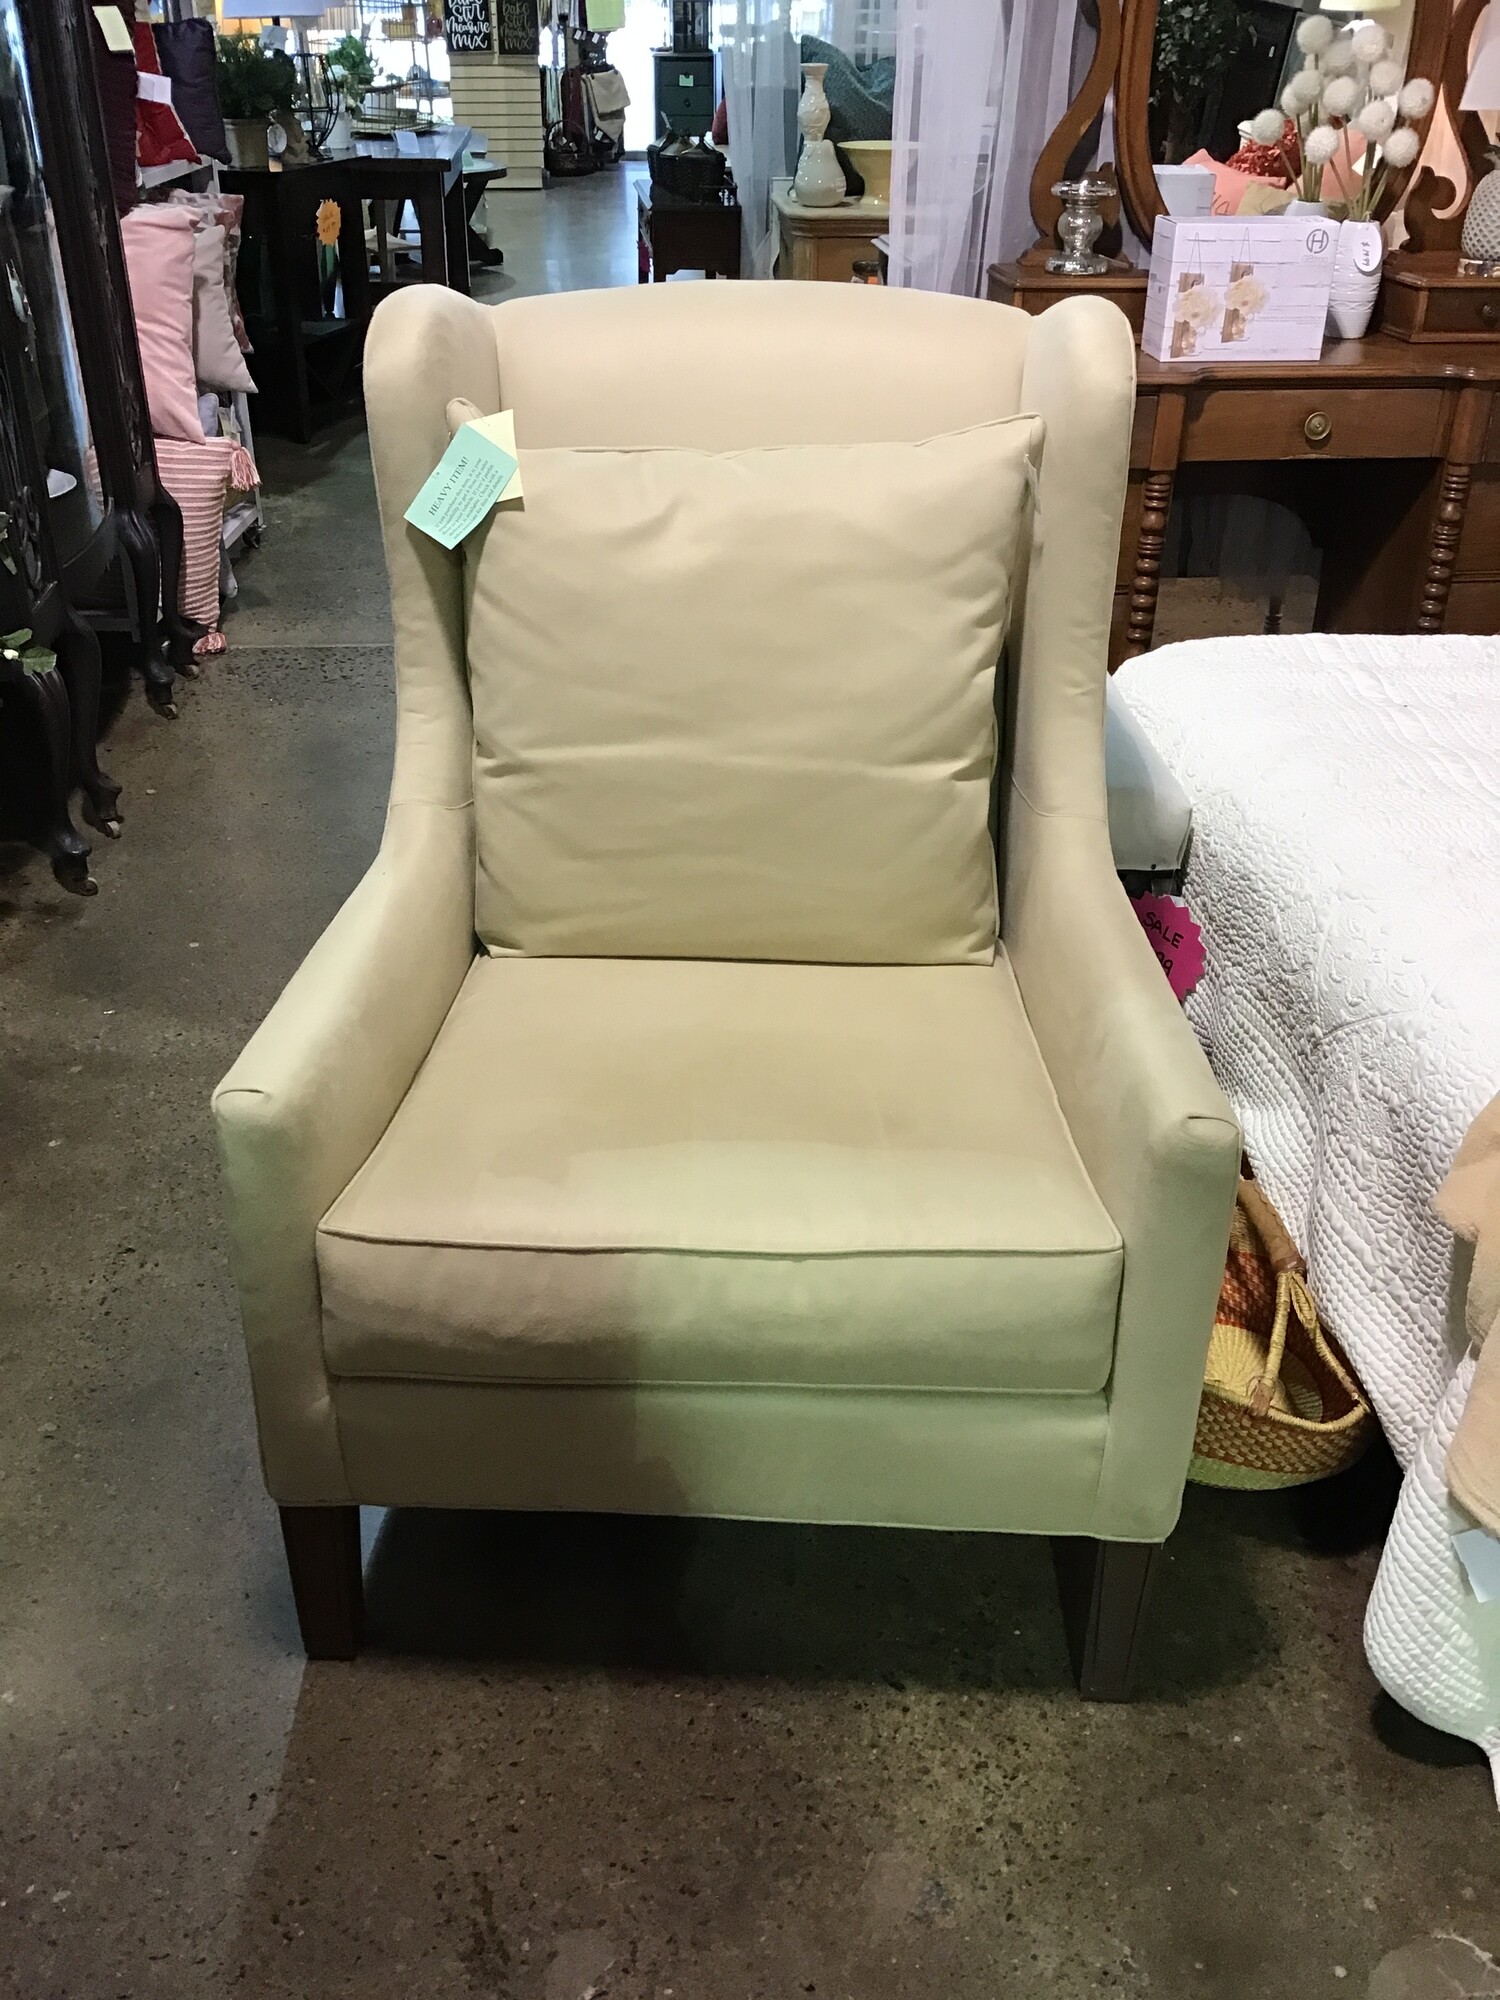 If you are looking for a super comfortable stylish chair, we defnitely have one for you! This neutral cream wingback features flippable cushions and modern styling. Great piece for any room!
Dimensions are 32 in x 36 in x 43 in